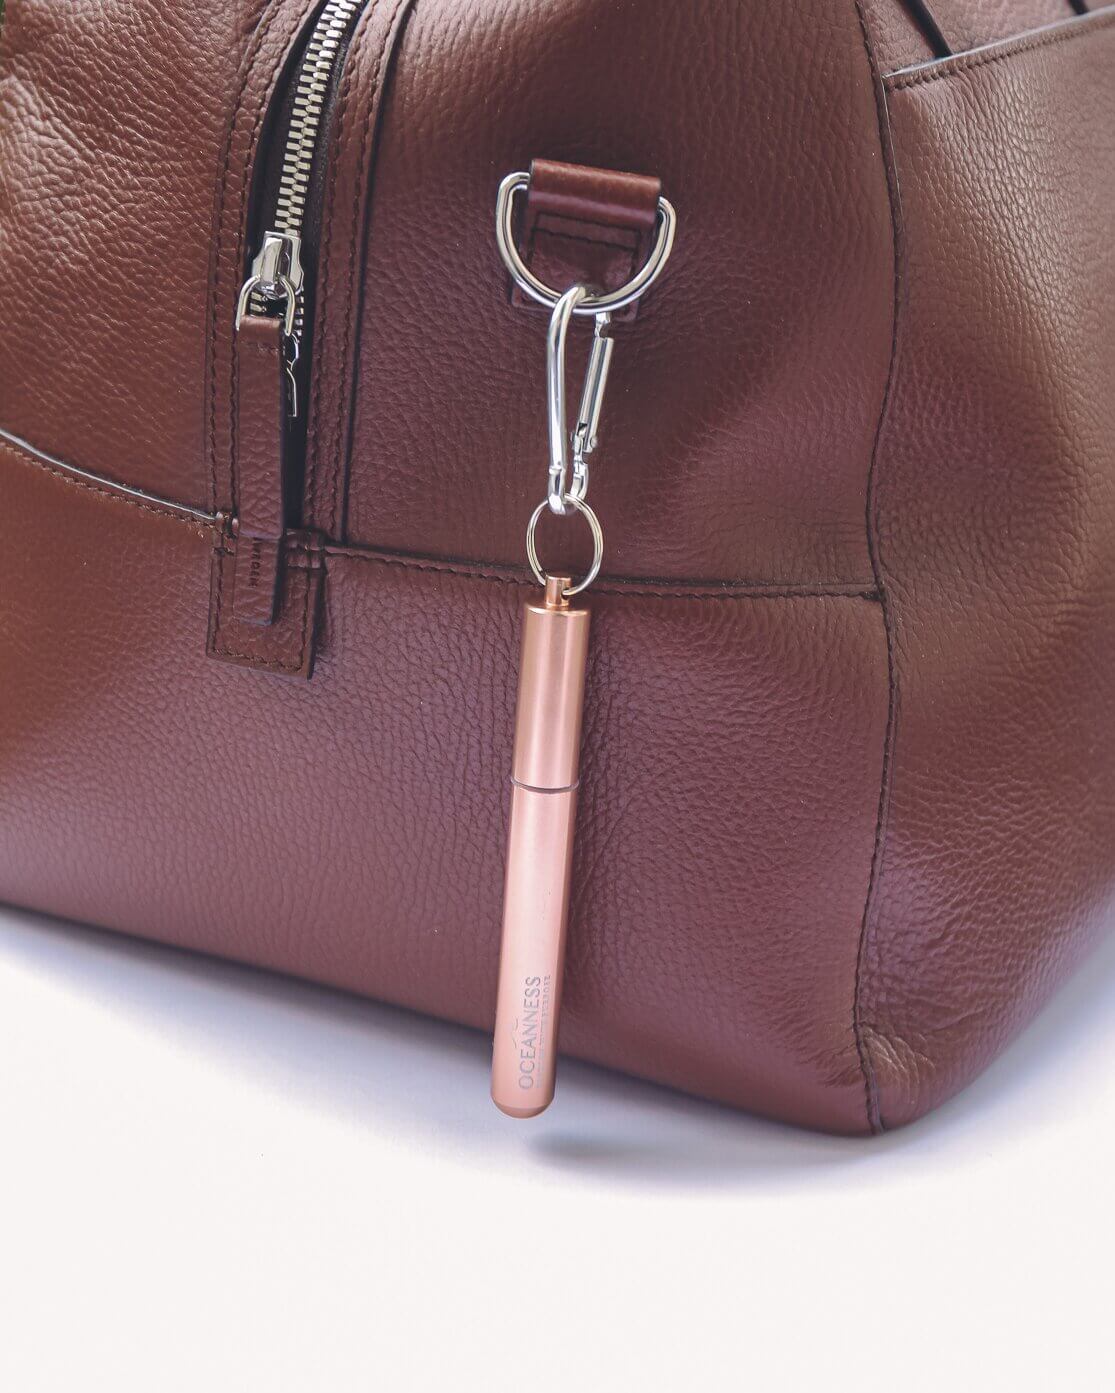 Oceanness rose gold reusable travel straw hanging on a bag with carabiner